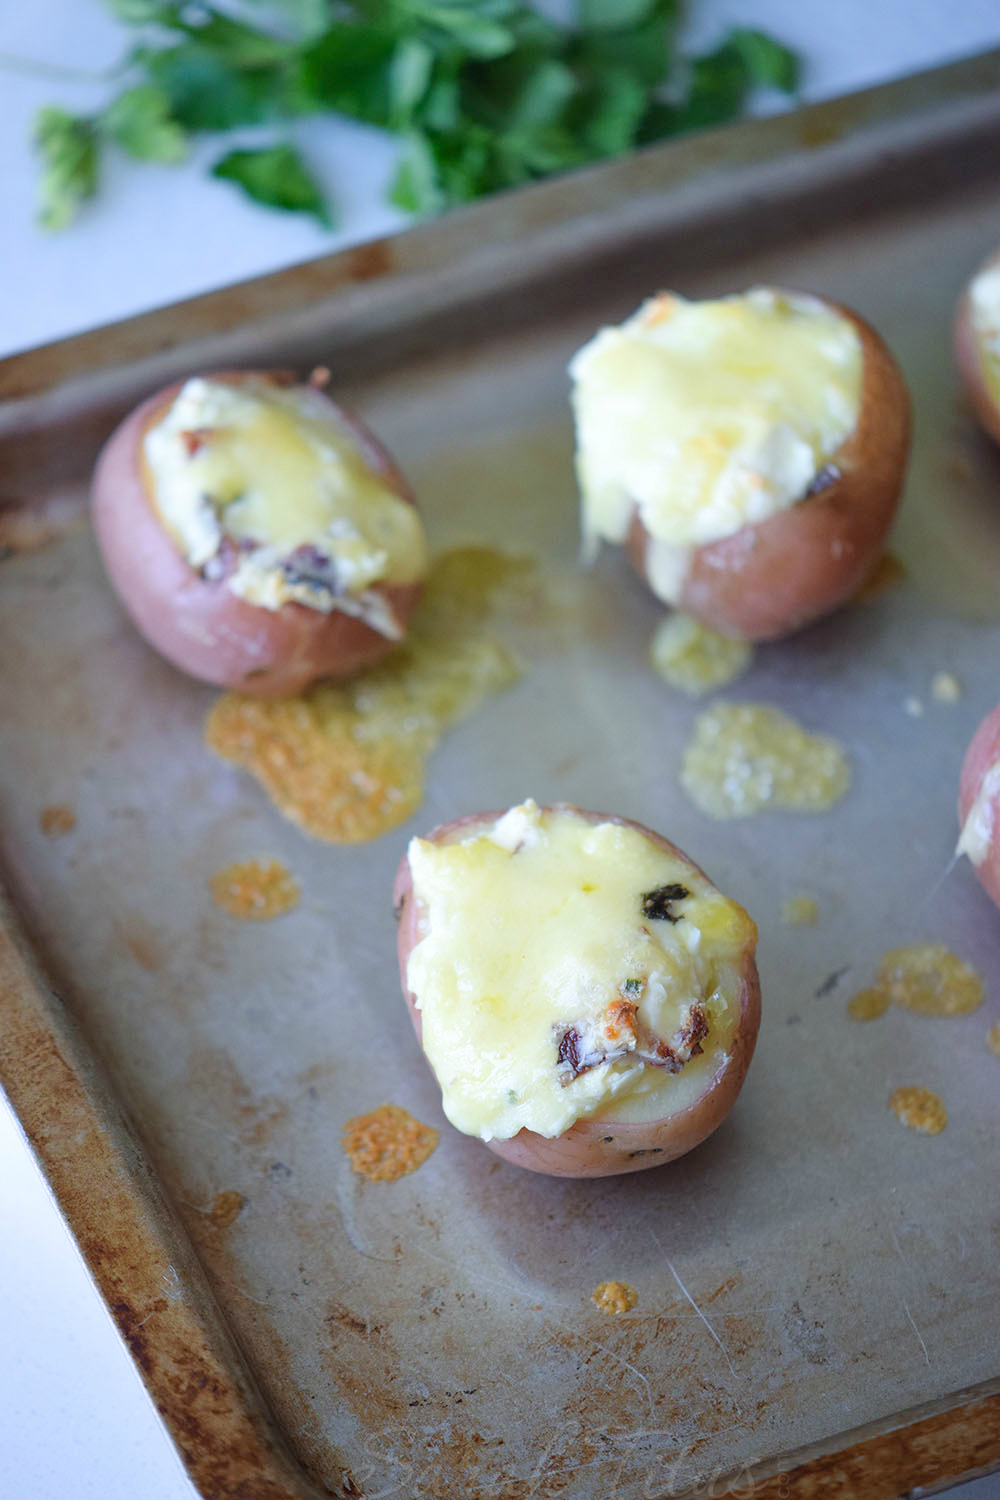 The mini stuffed potato bites fresh from the oven all baked and cheesy